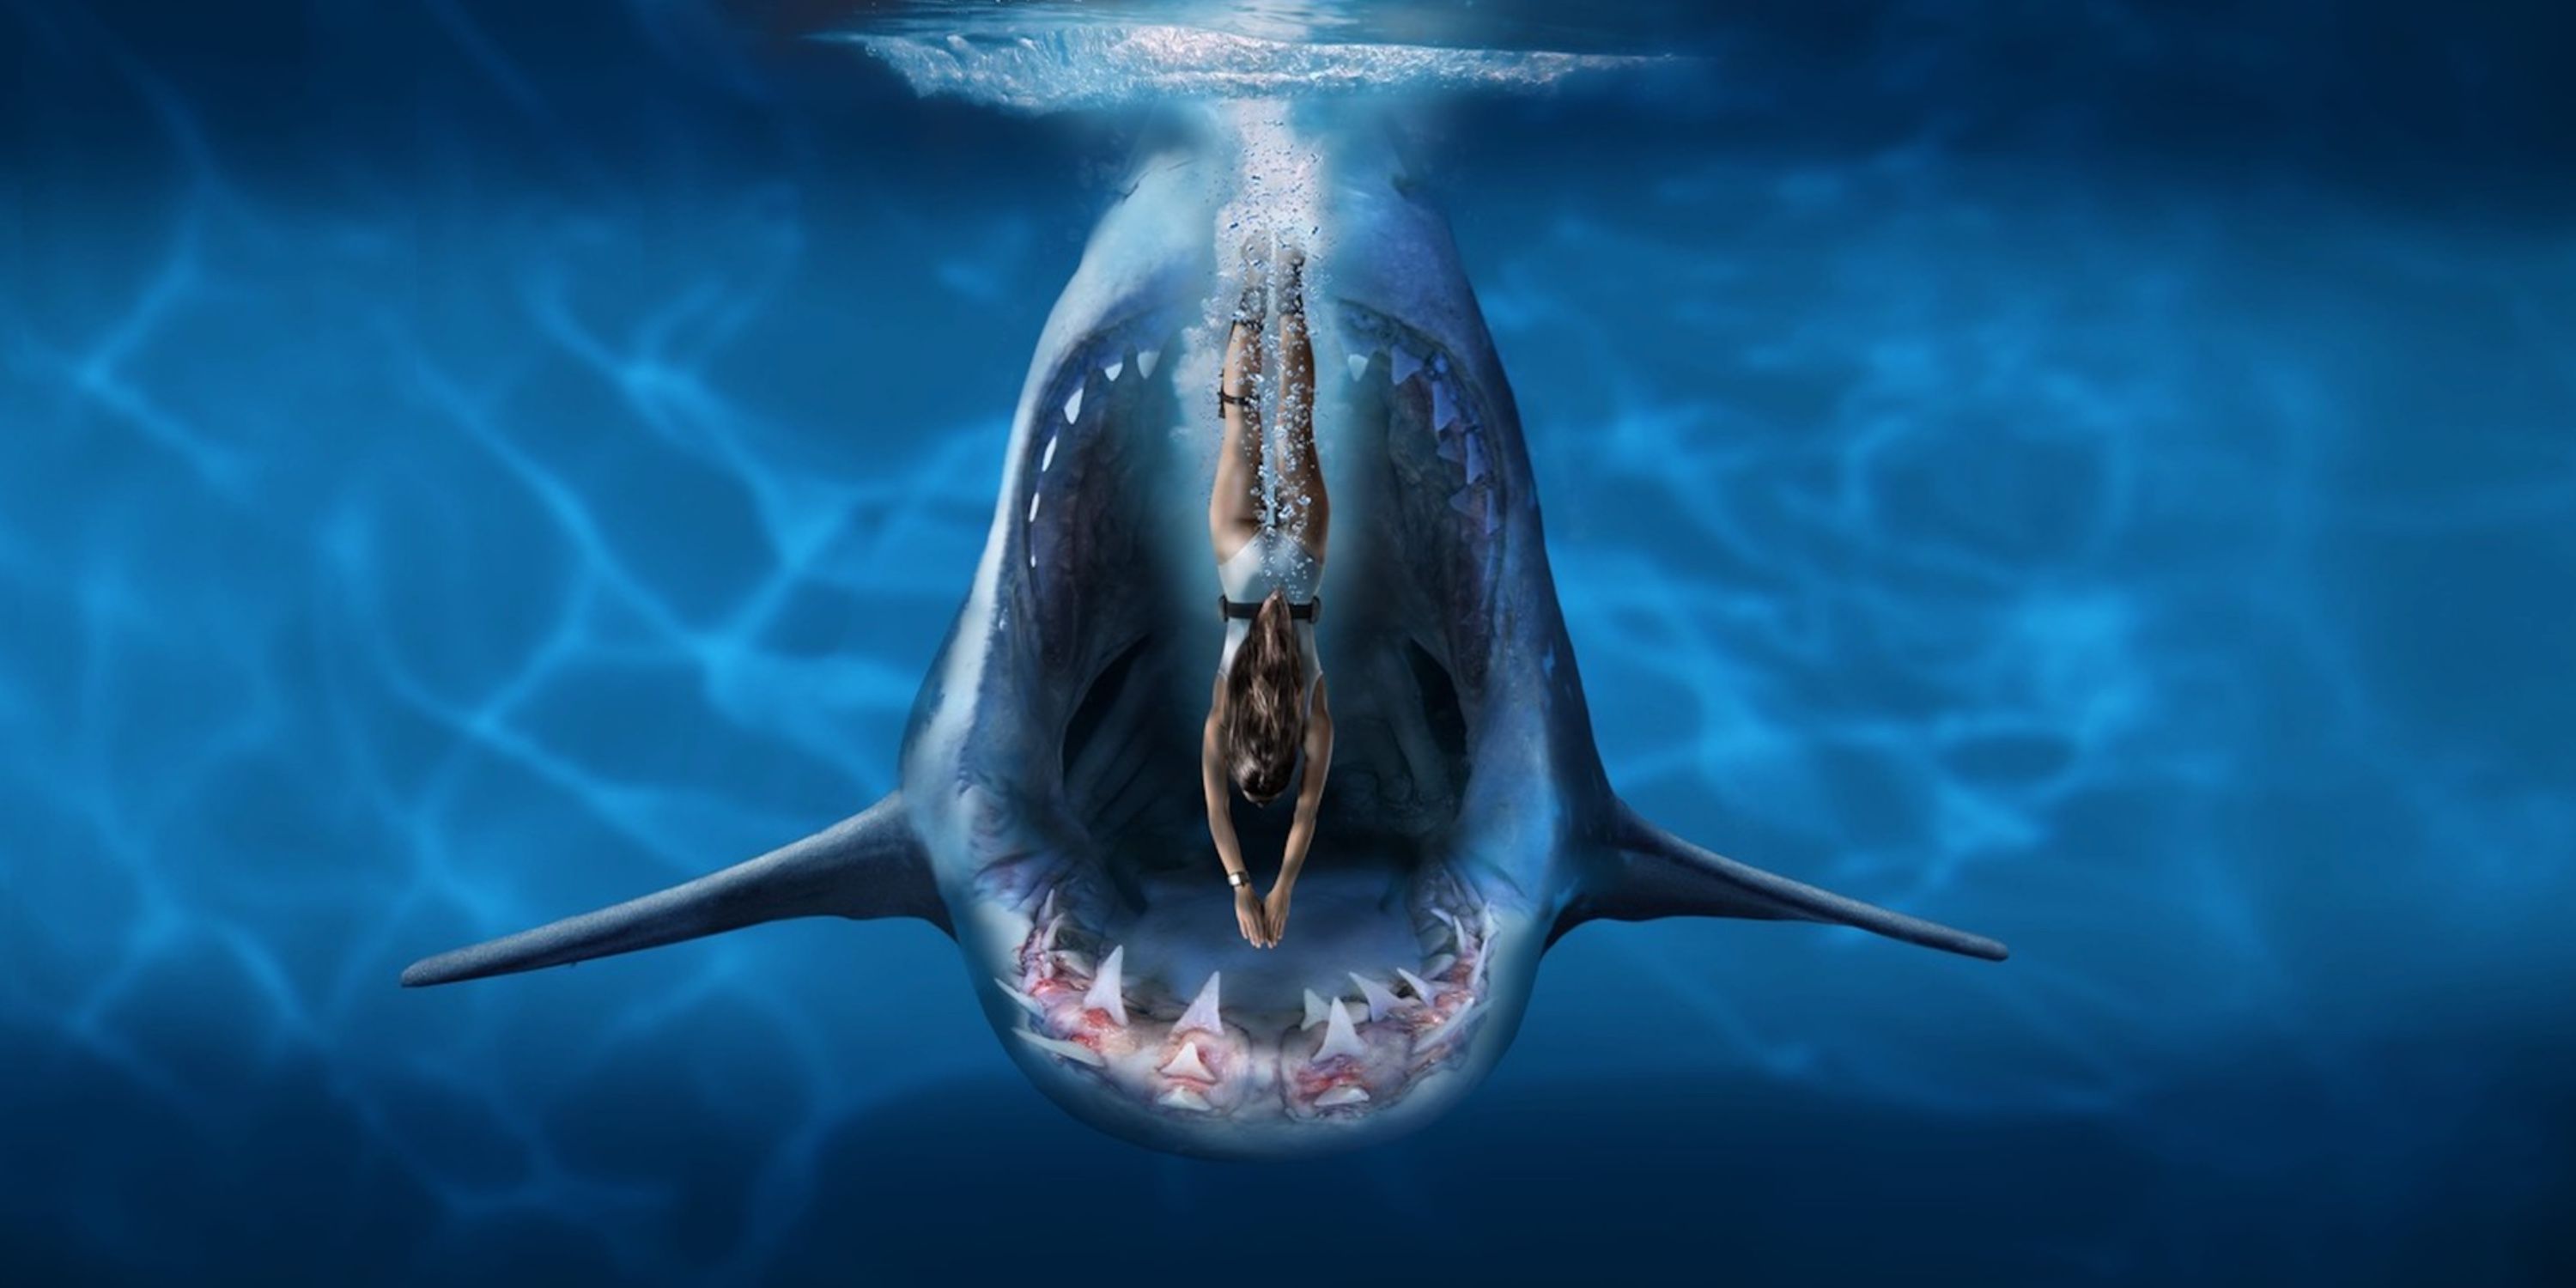 Deep Blue Sea Movies Ranked Worst To Best